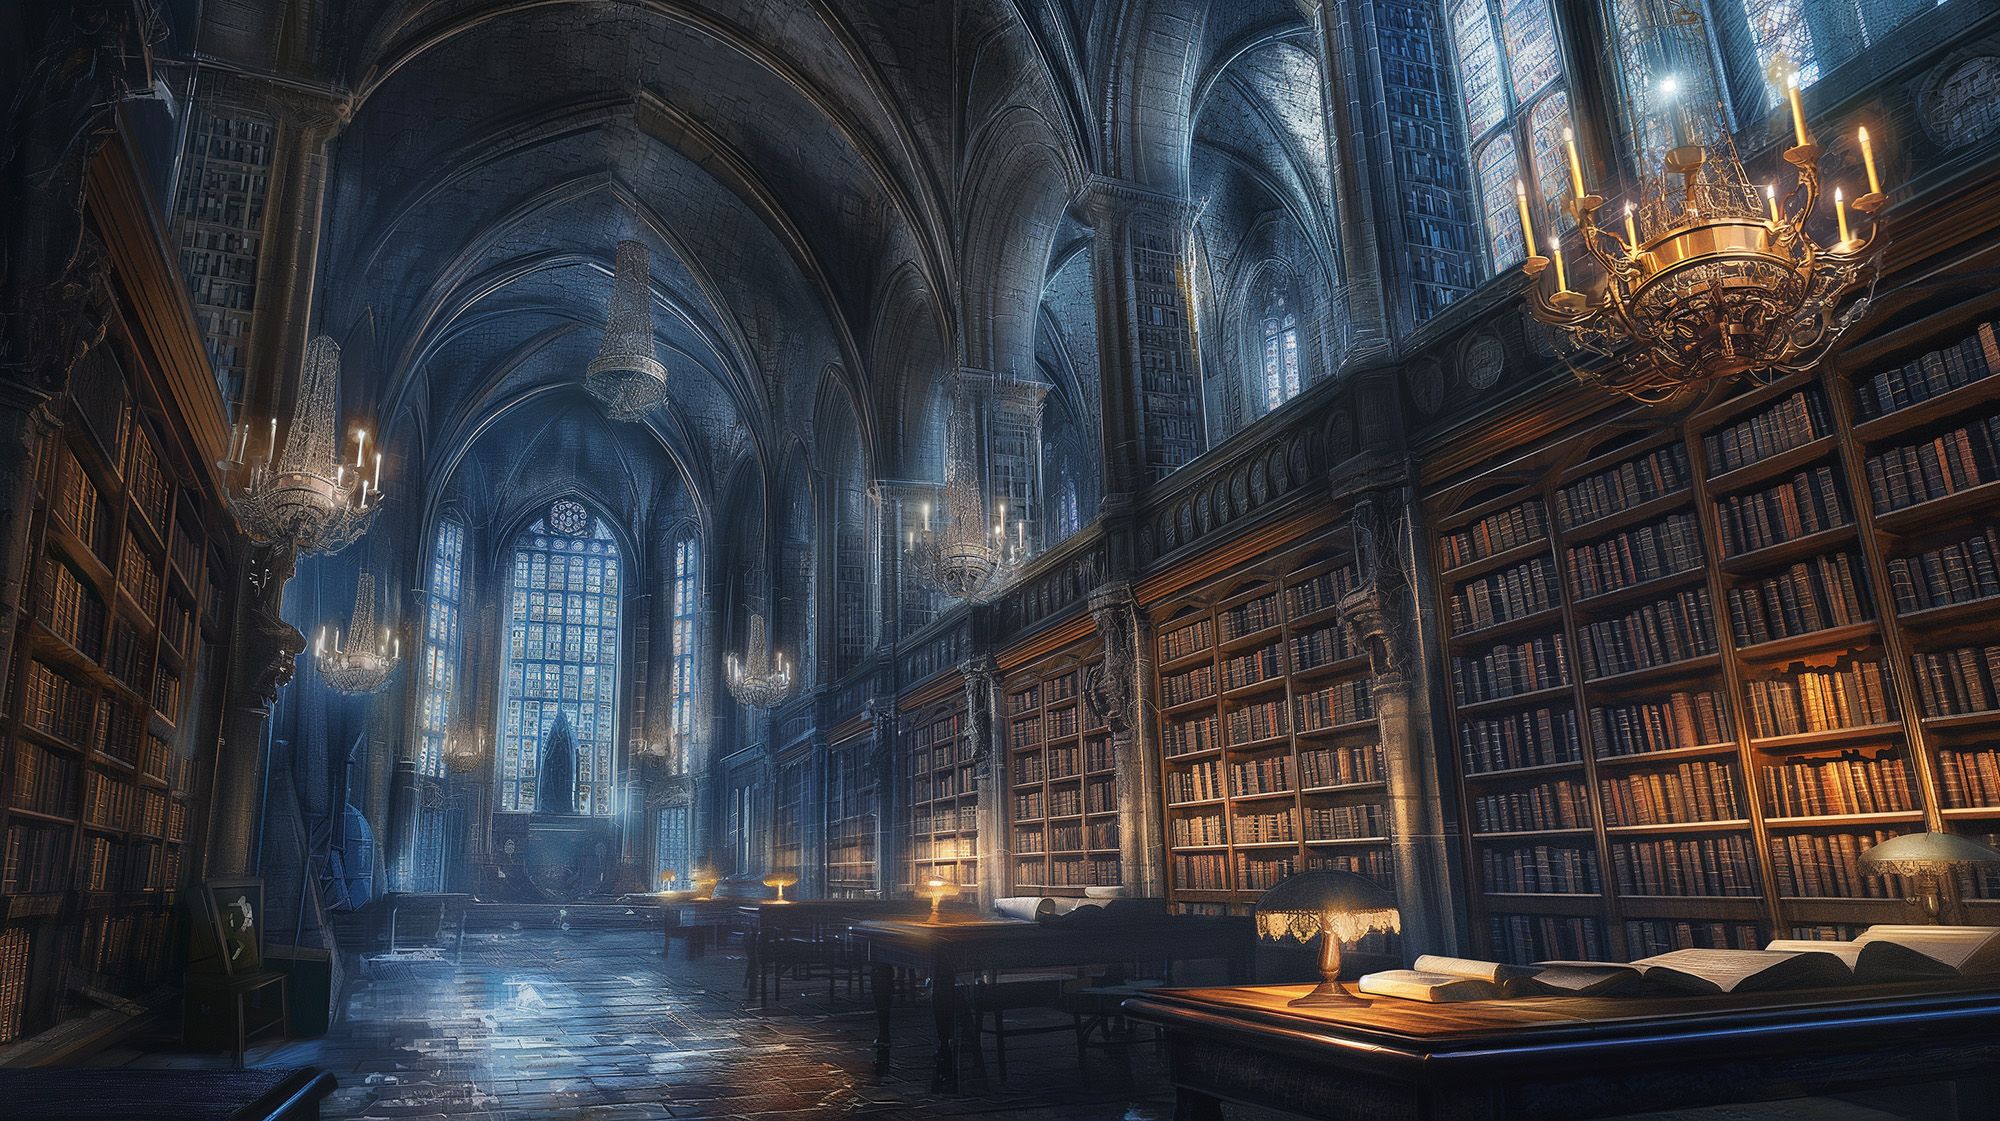 Beautiful image inspired by the castle Hogwarths Library - AI art